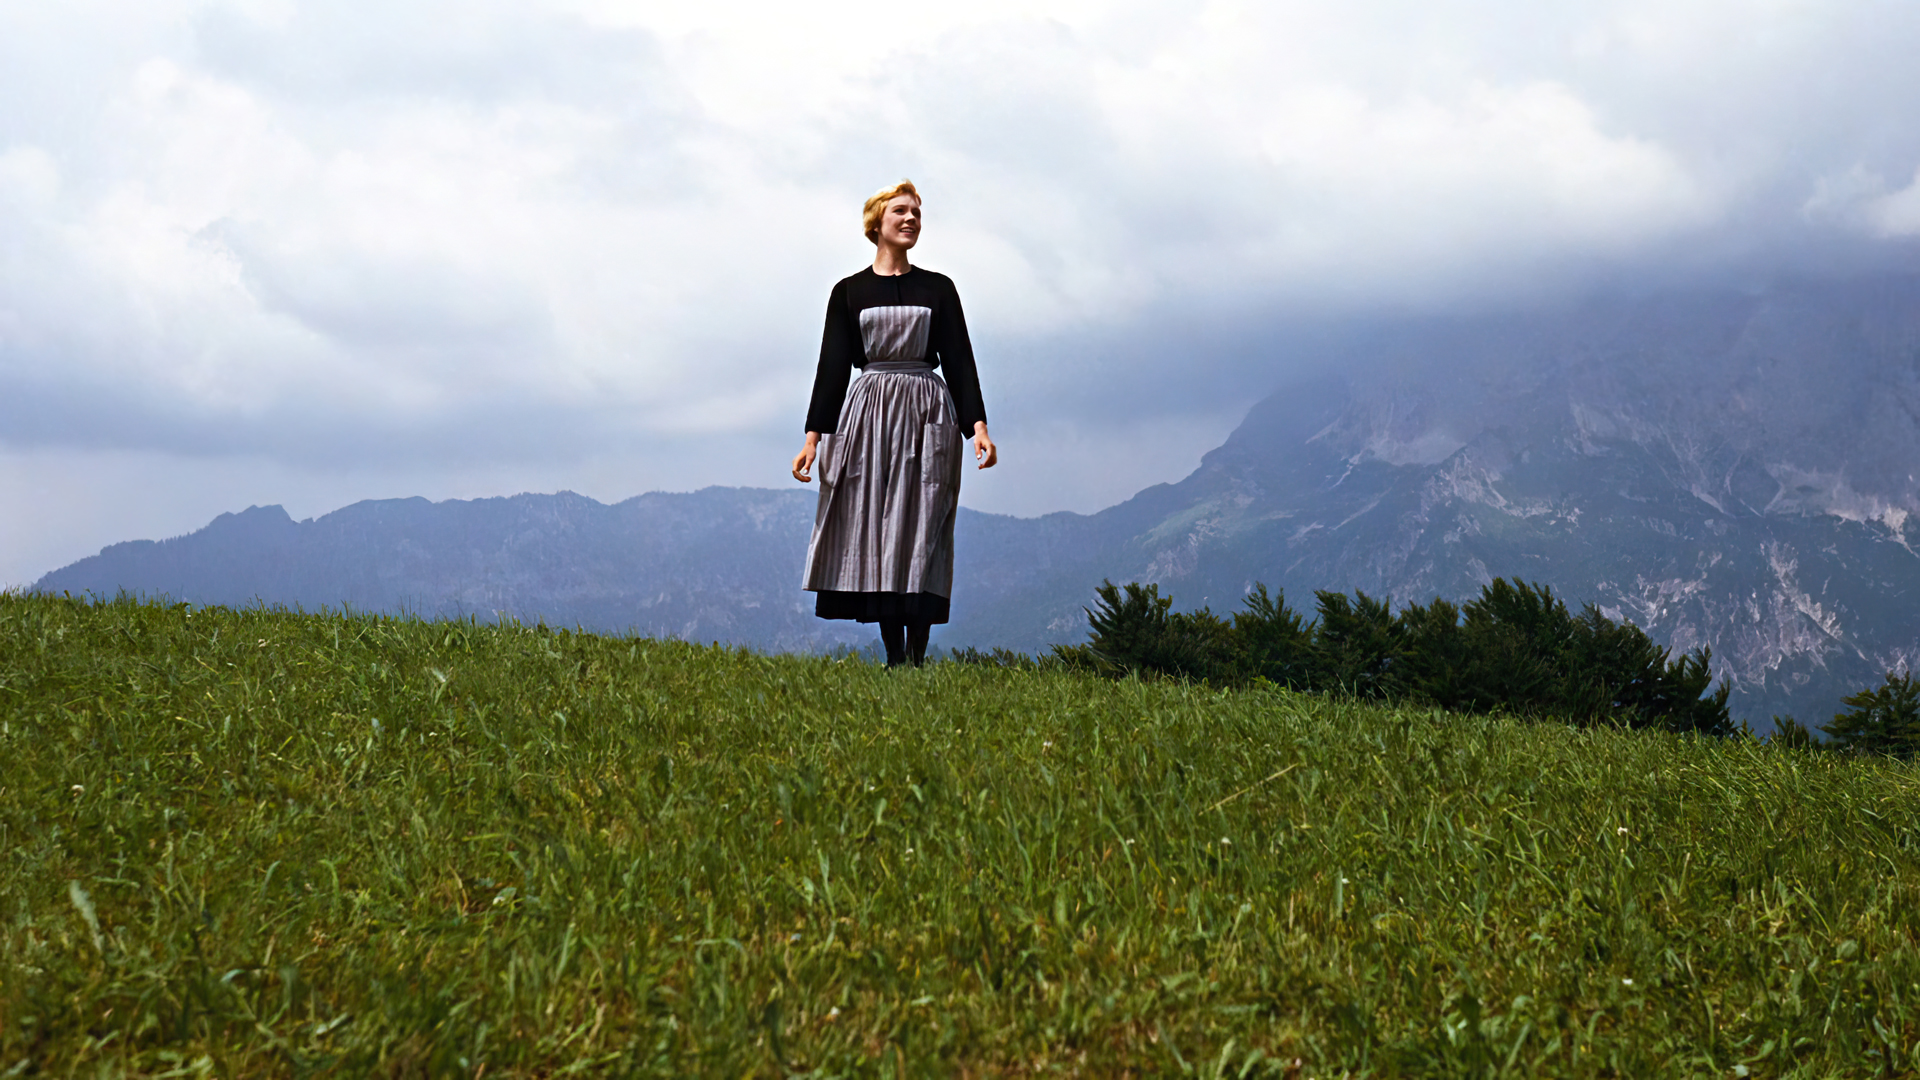 People 1920x1080 The Sound of Music movies film stills Julie Andrews actress mountains field hills clouds women